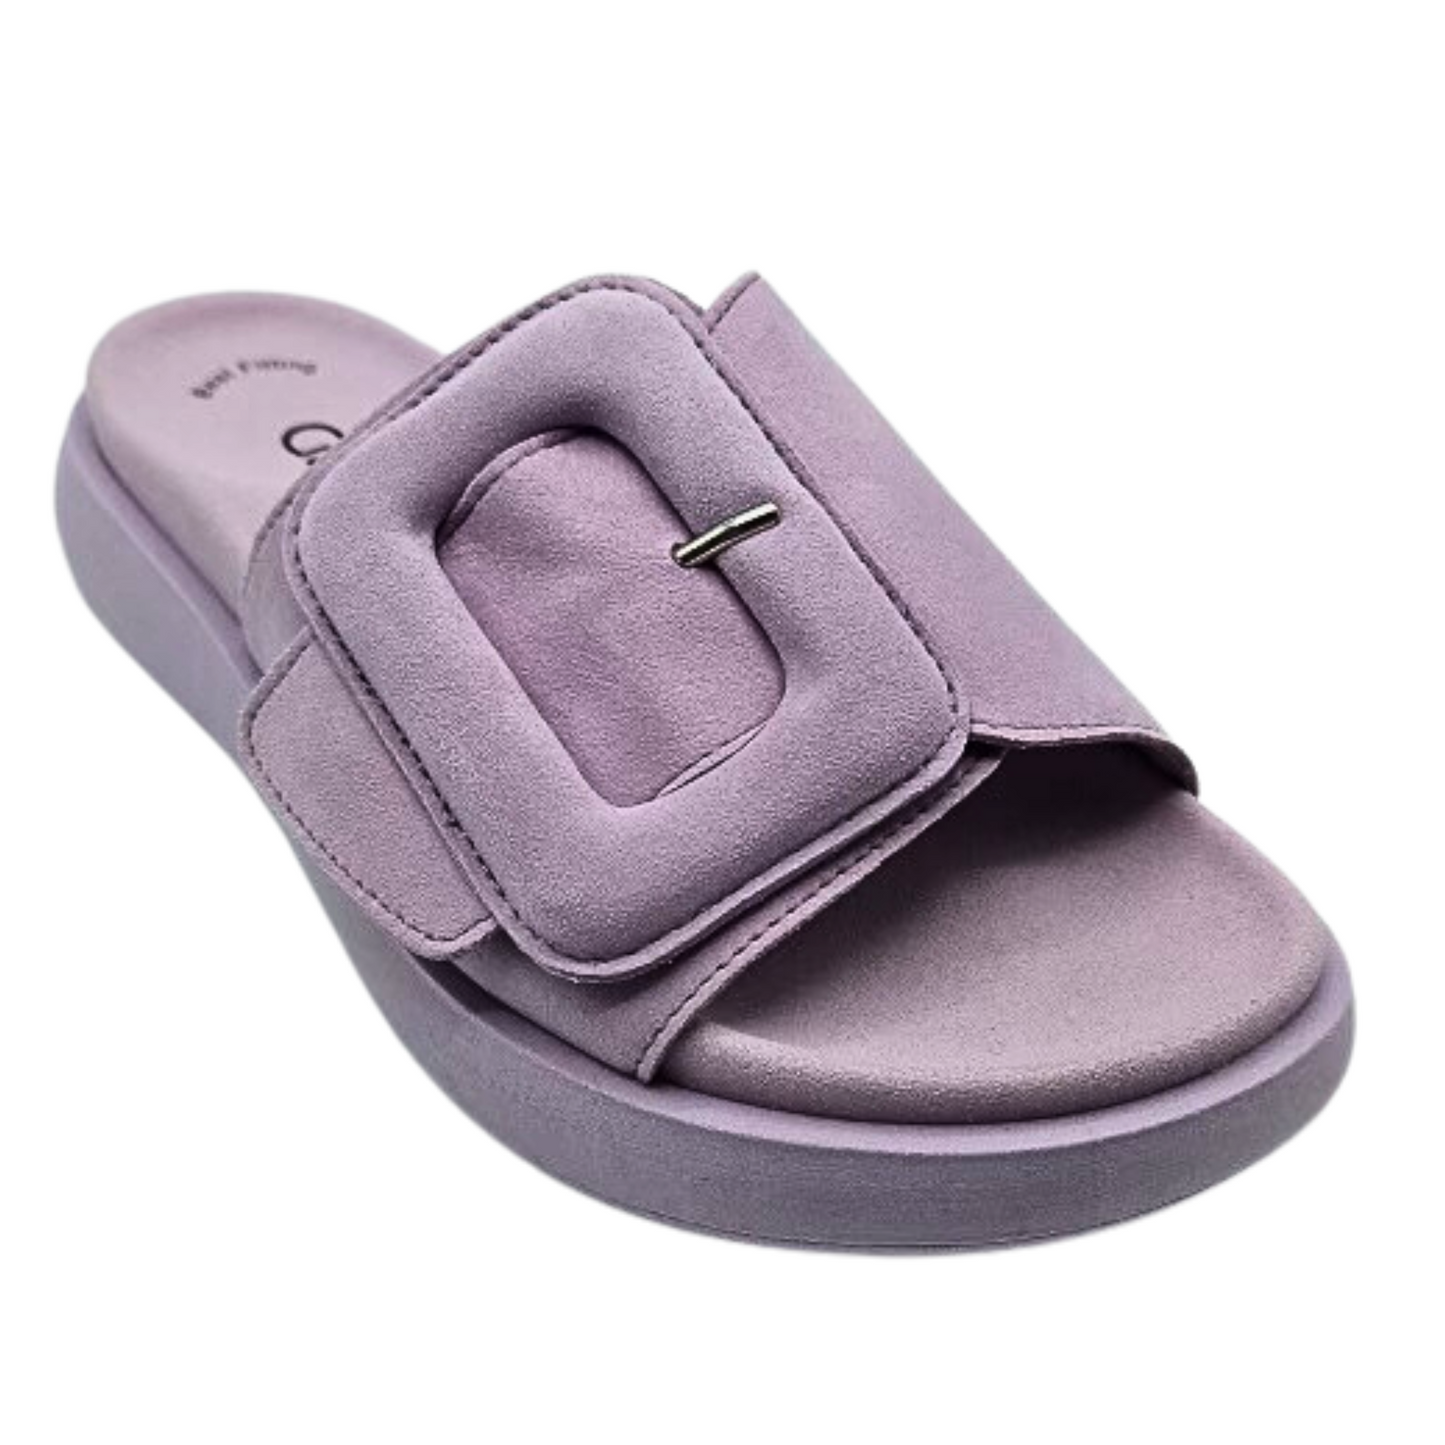 Angled side view of gorgeous slide by Gabor.  Lilac nubuk upper with large buckle detail done in the same material